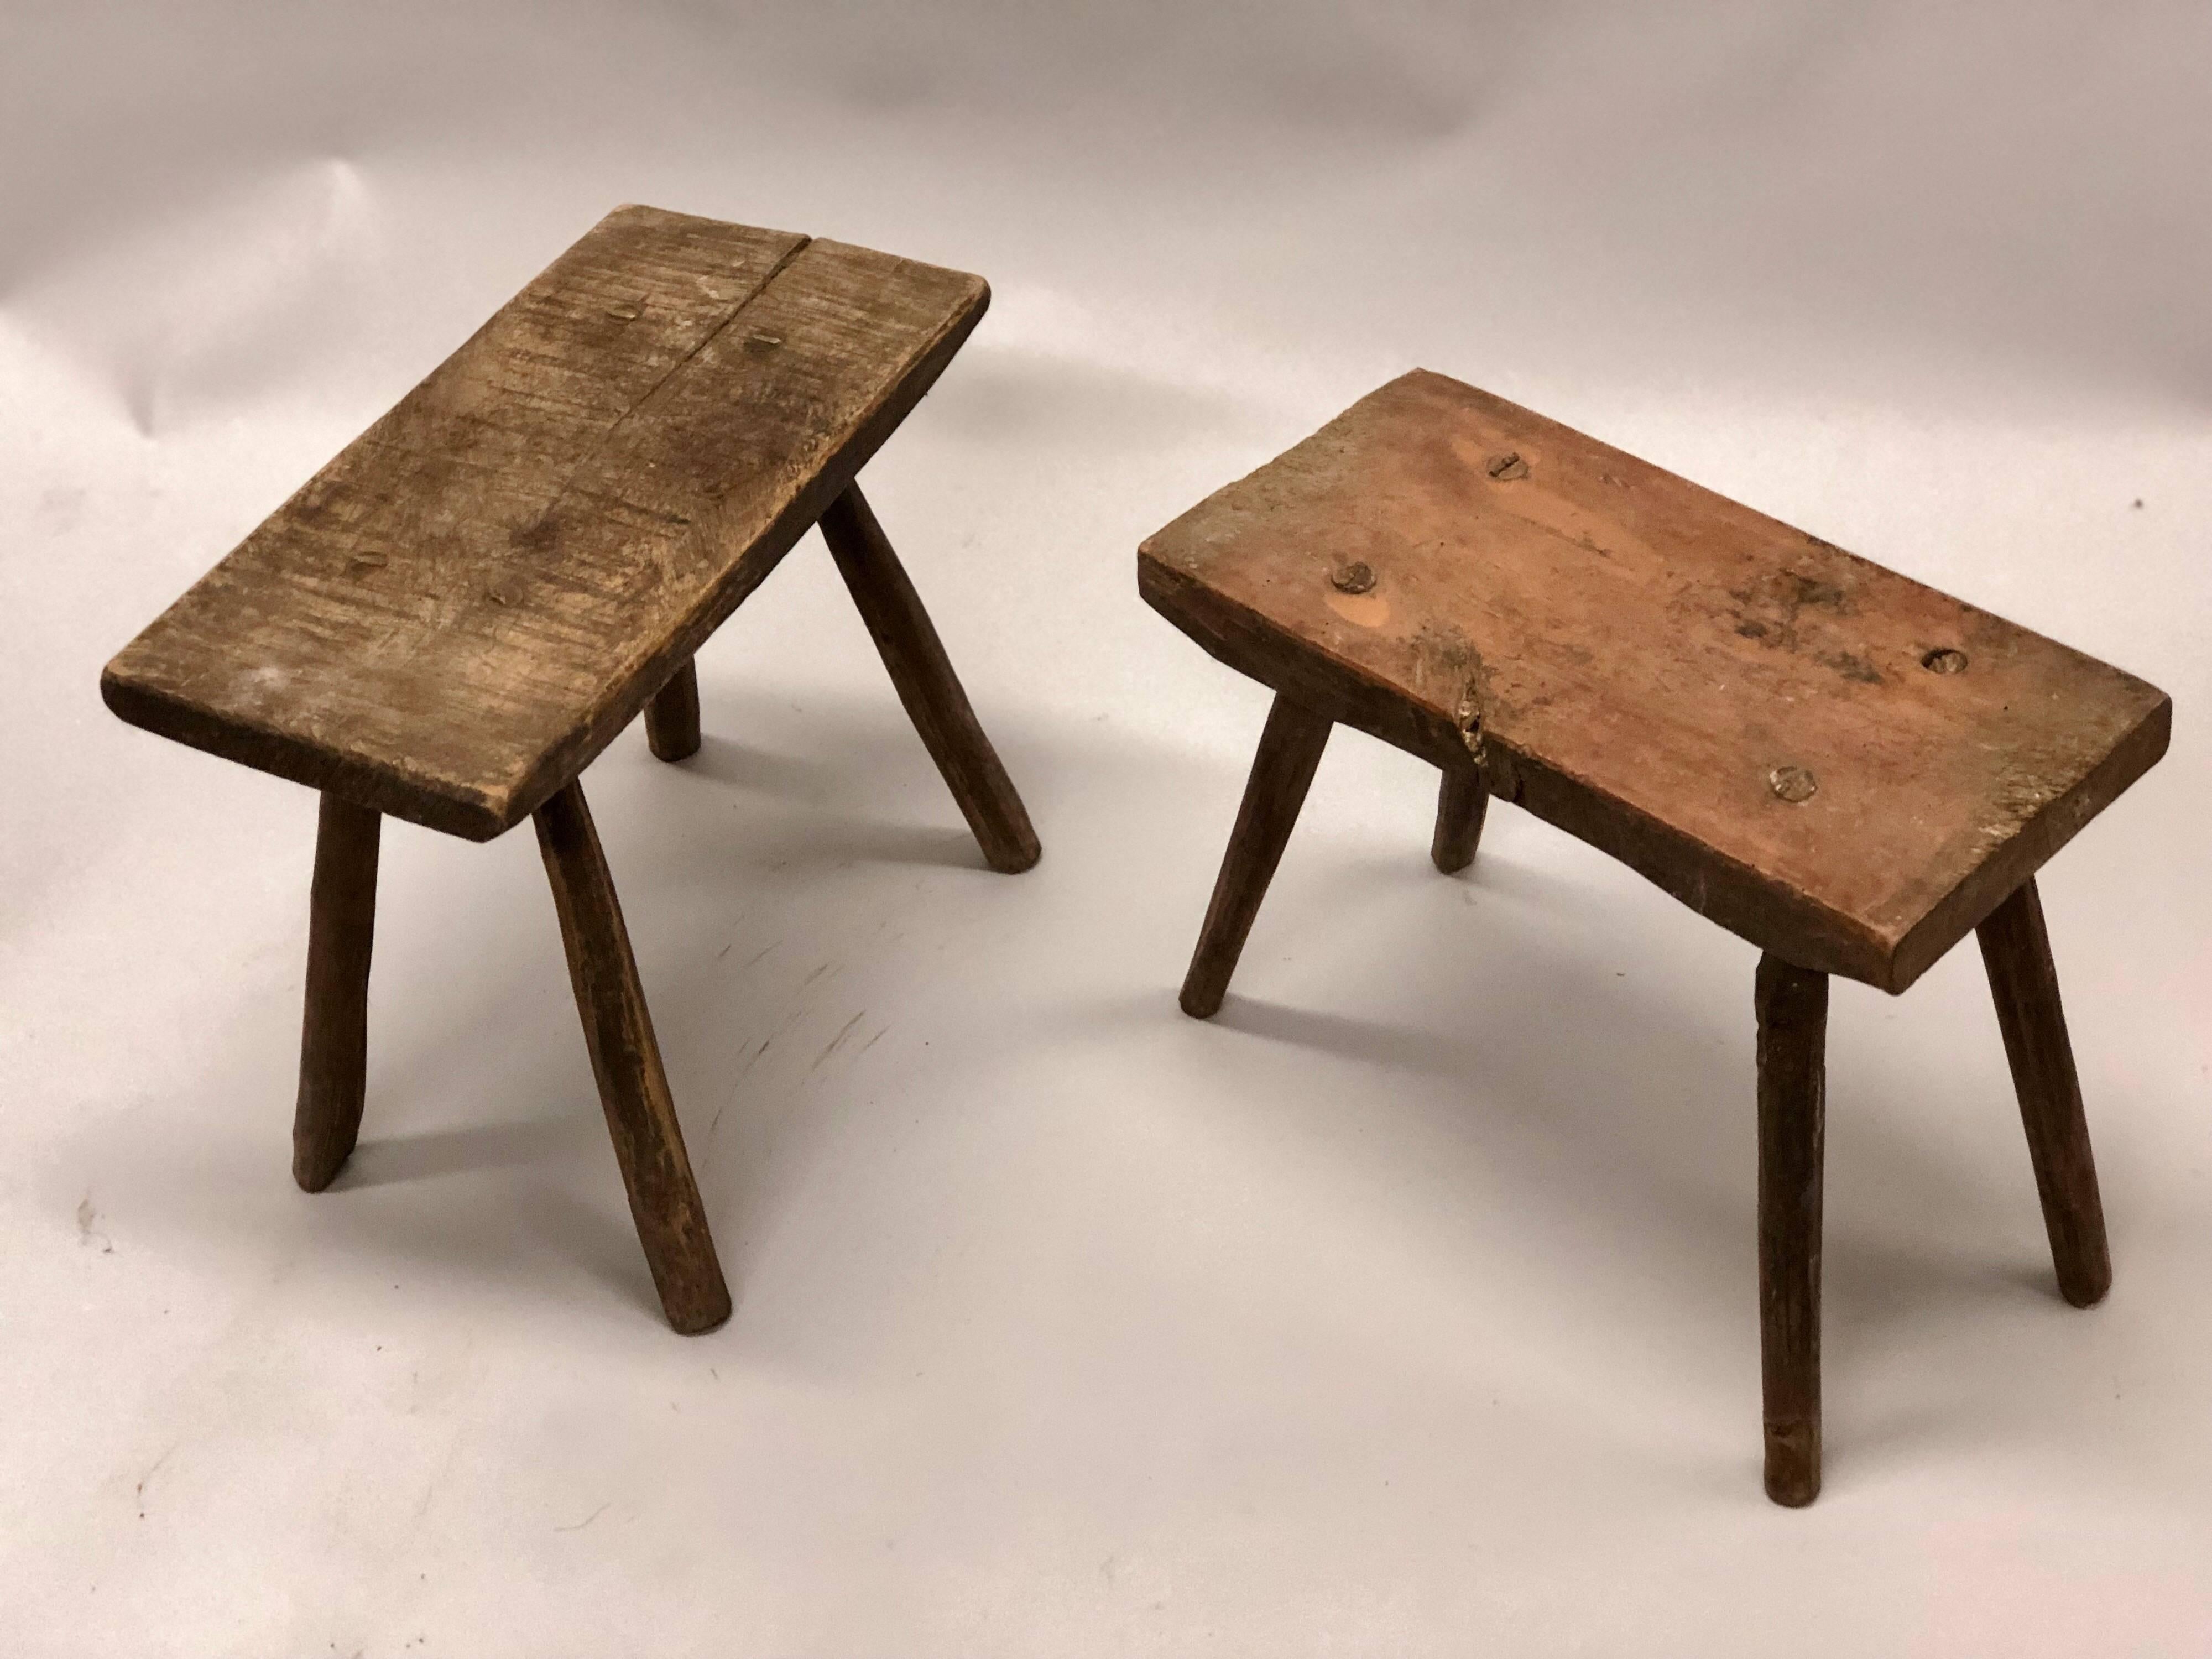 French midcentury rustic, Primitivist pair of carved wood benches, stools in the Brutalist or modern craftsman tradition.
 
One bench is slightly smaller than the other: H 13.5 x 17 x 7.83.